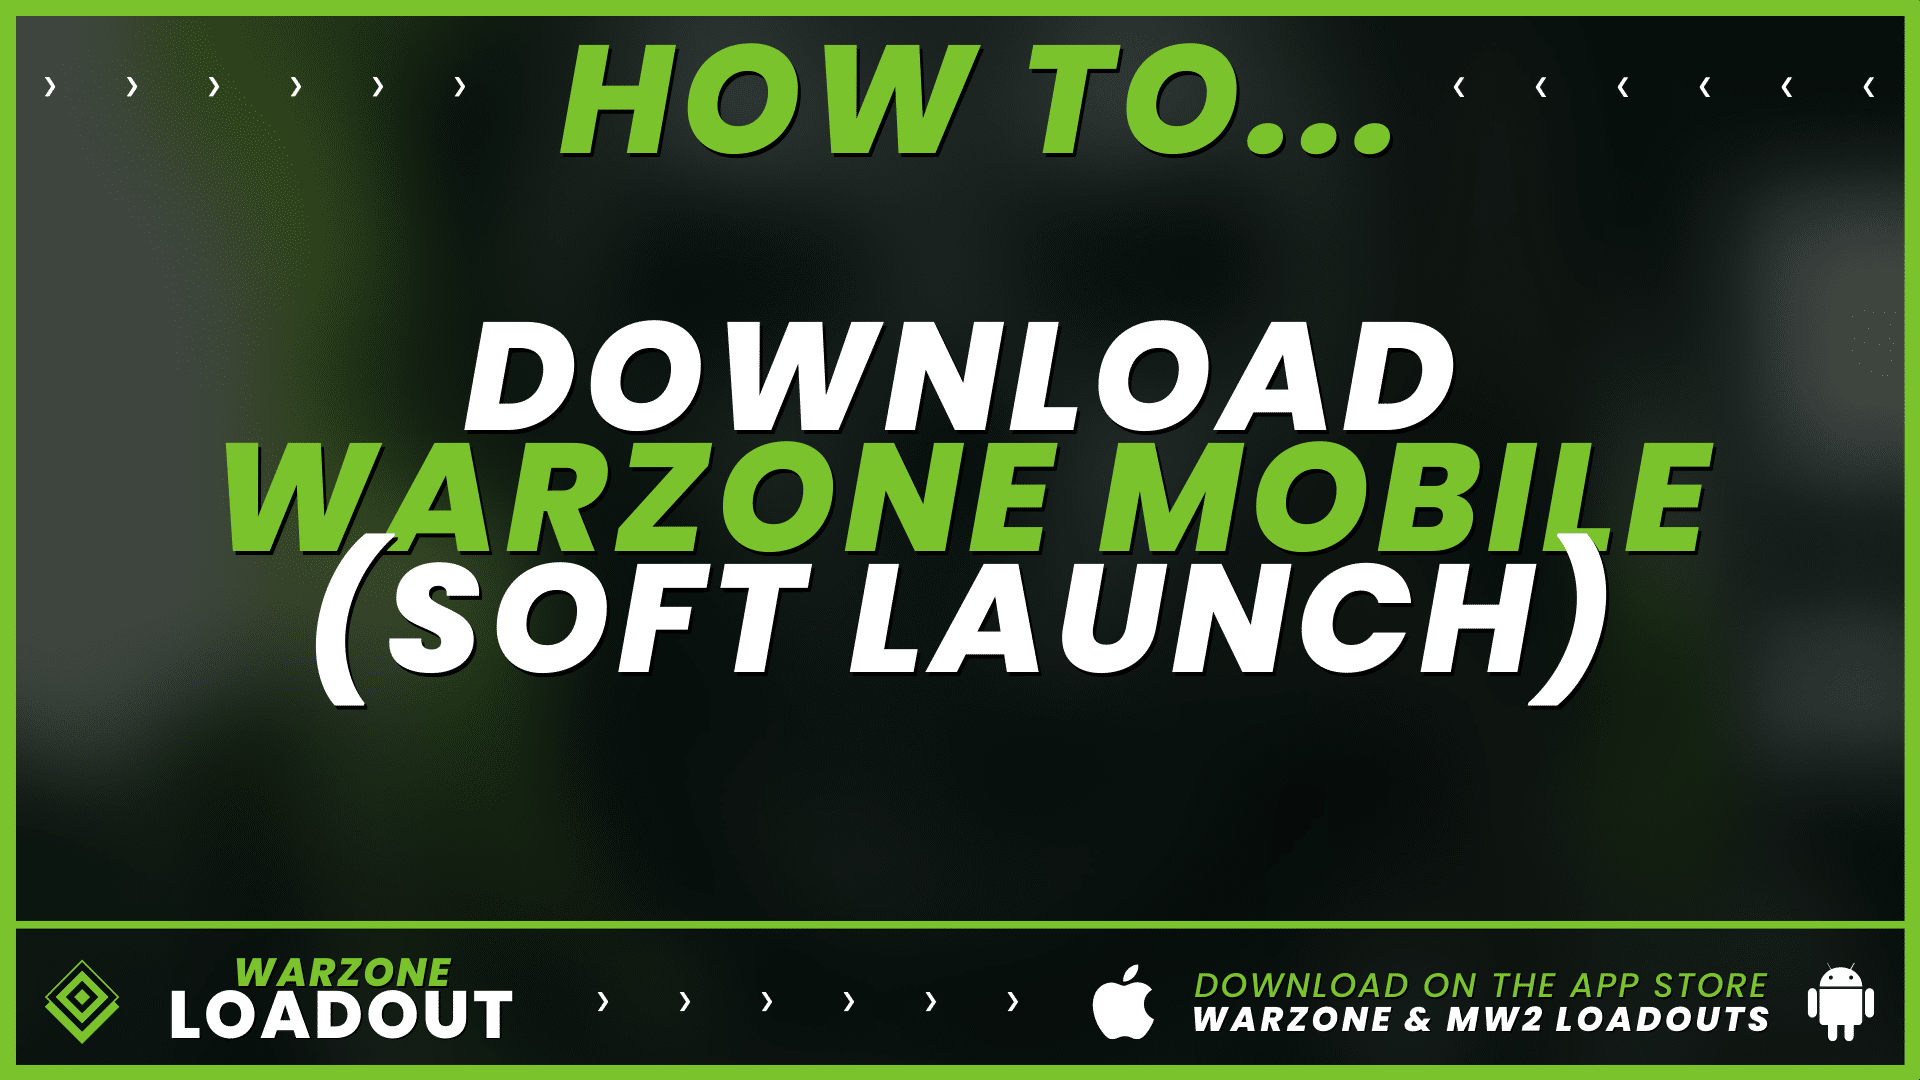 How to download Warzone Mobile (Soft Launch)